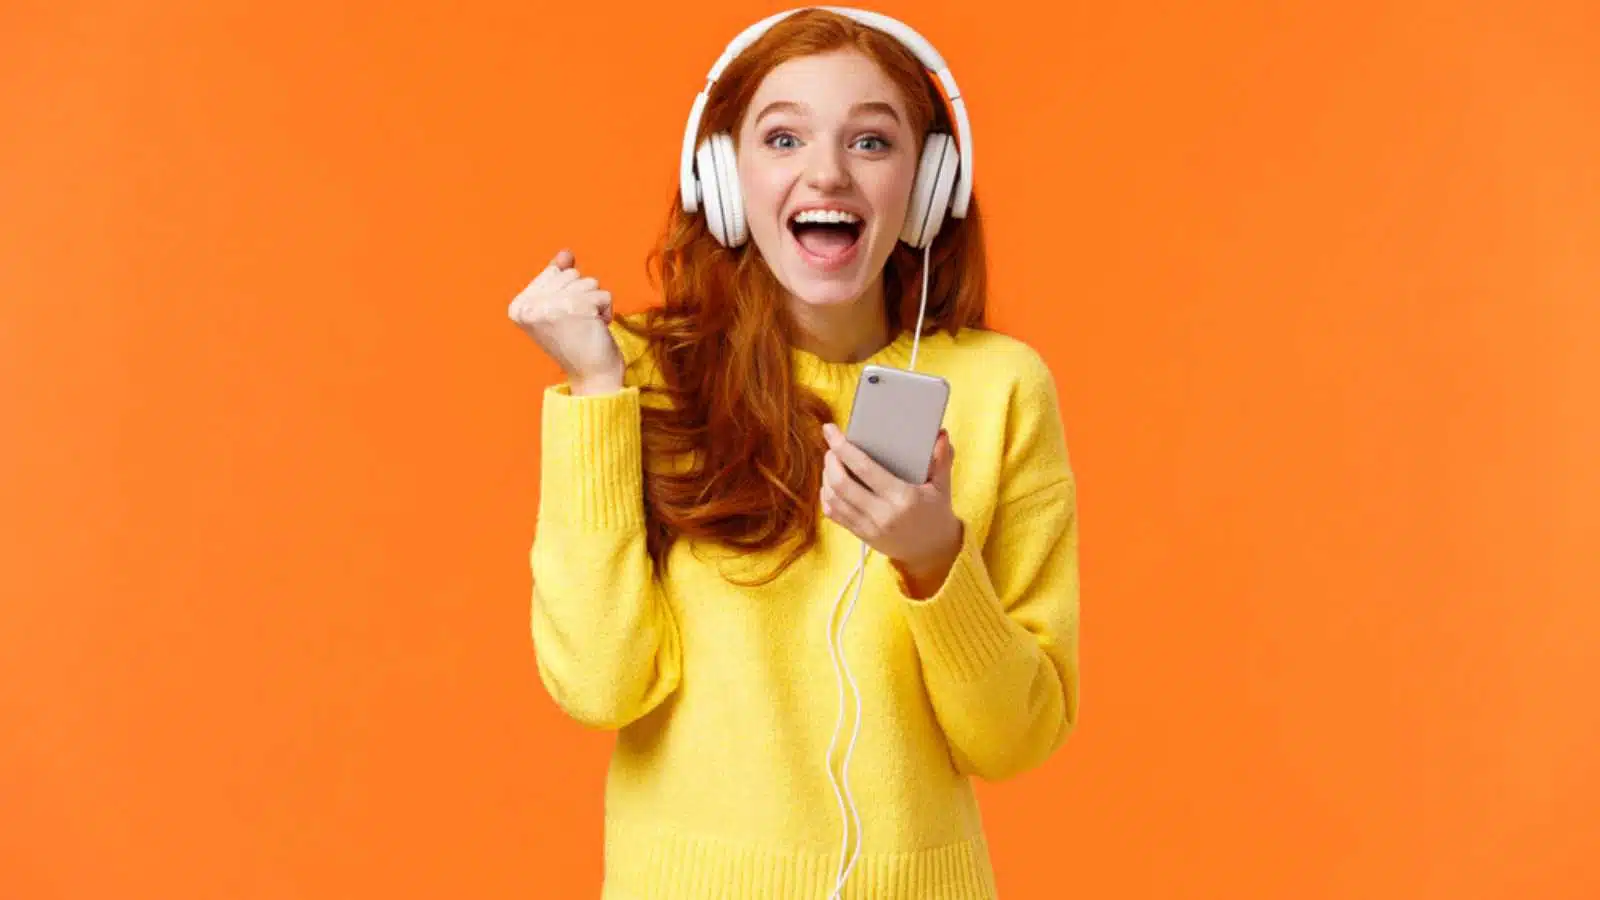 Attractive young woman listening to music